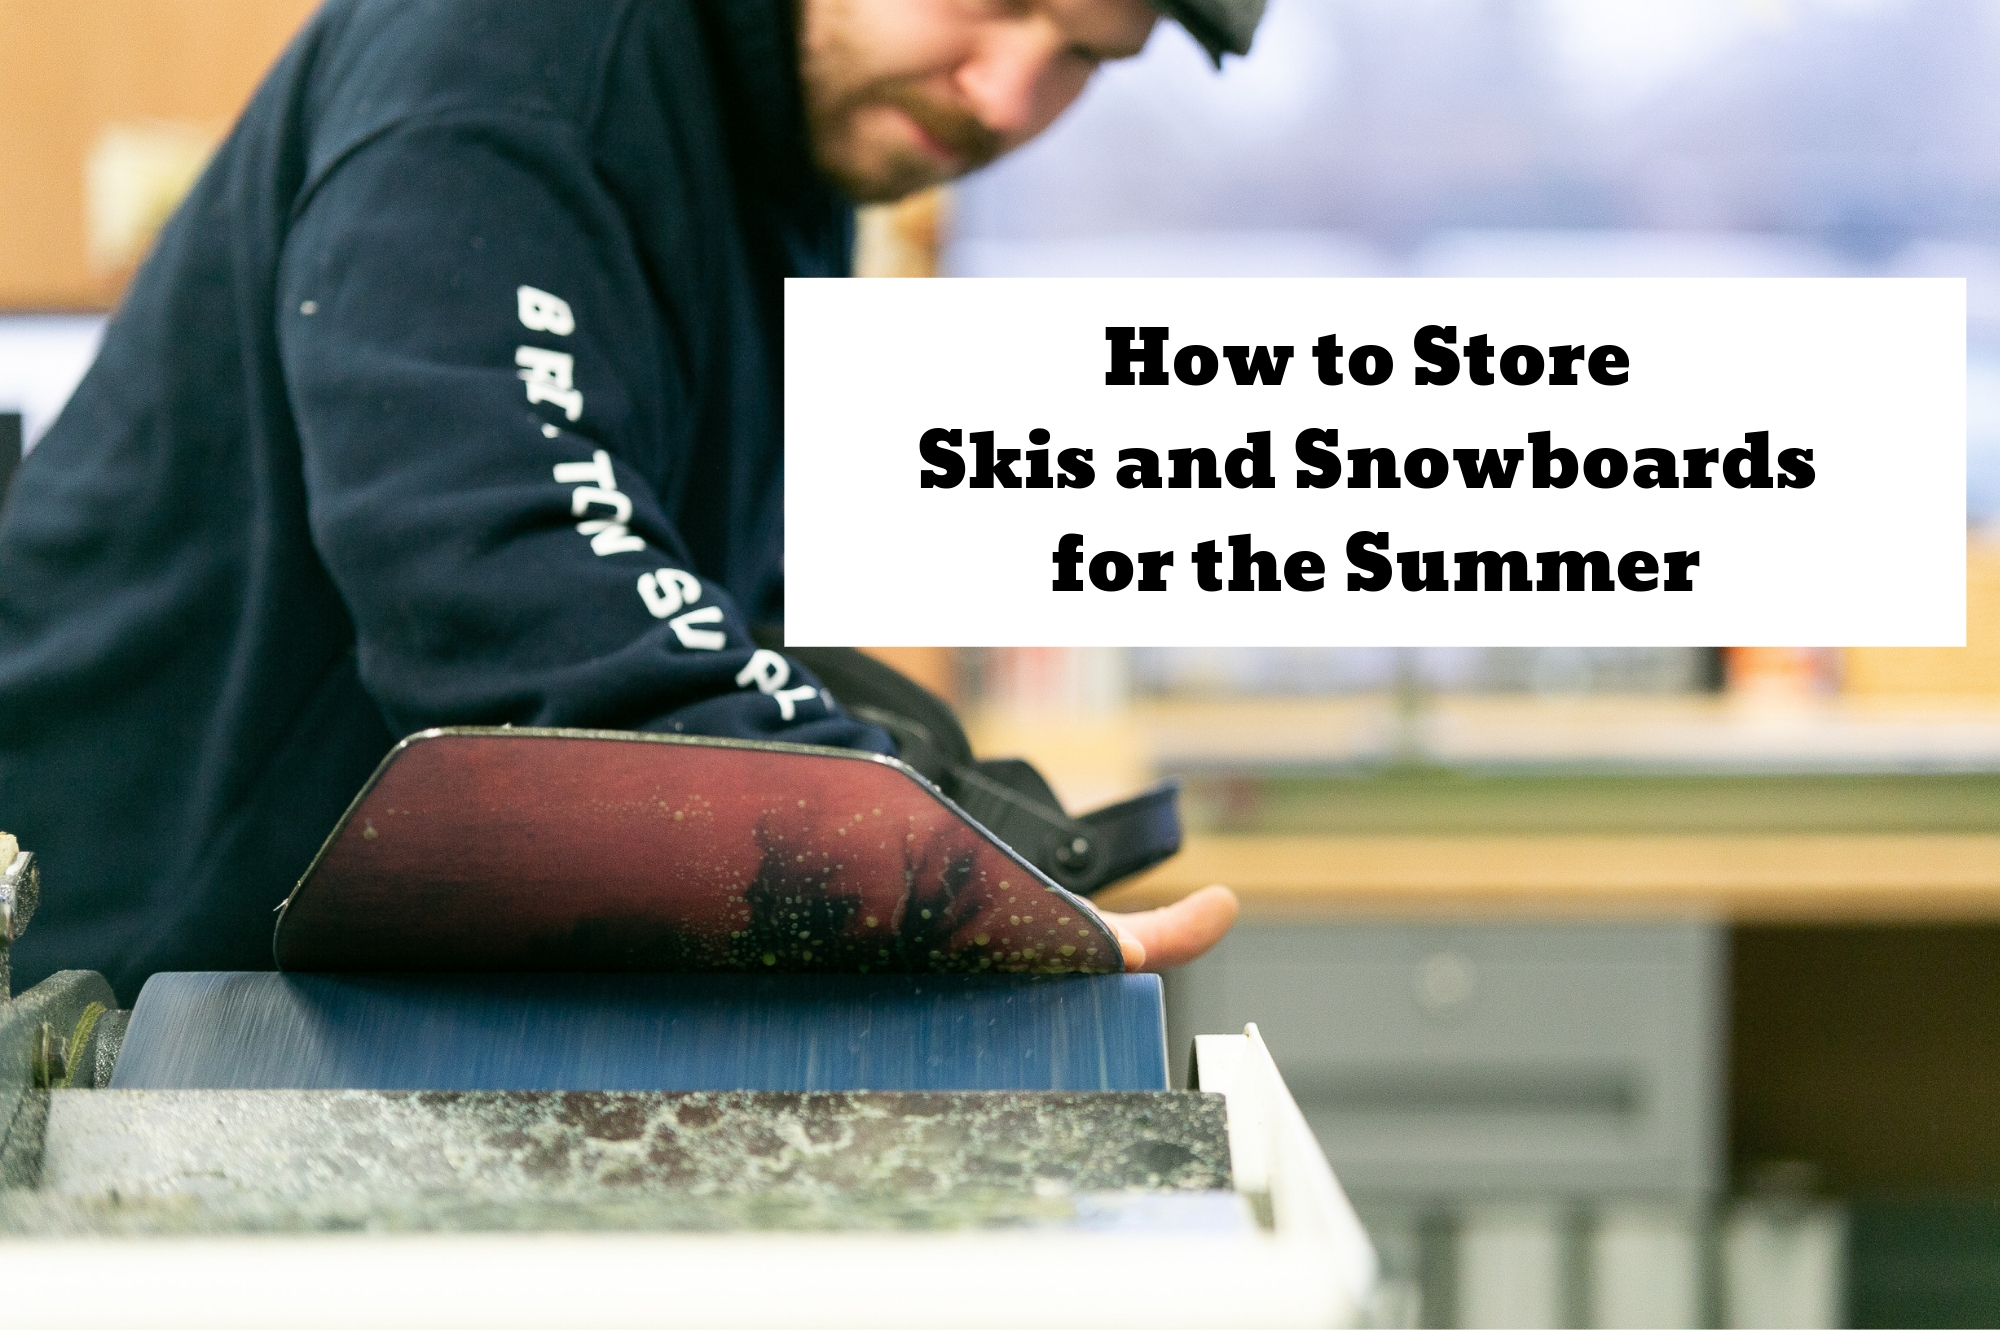 How to store skis and snowboards for the summer